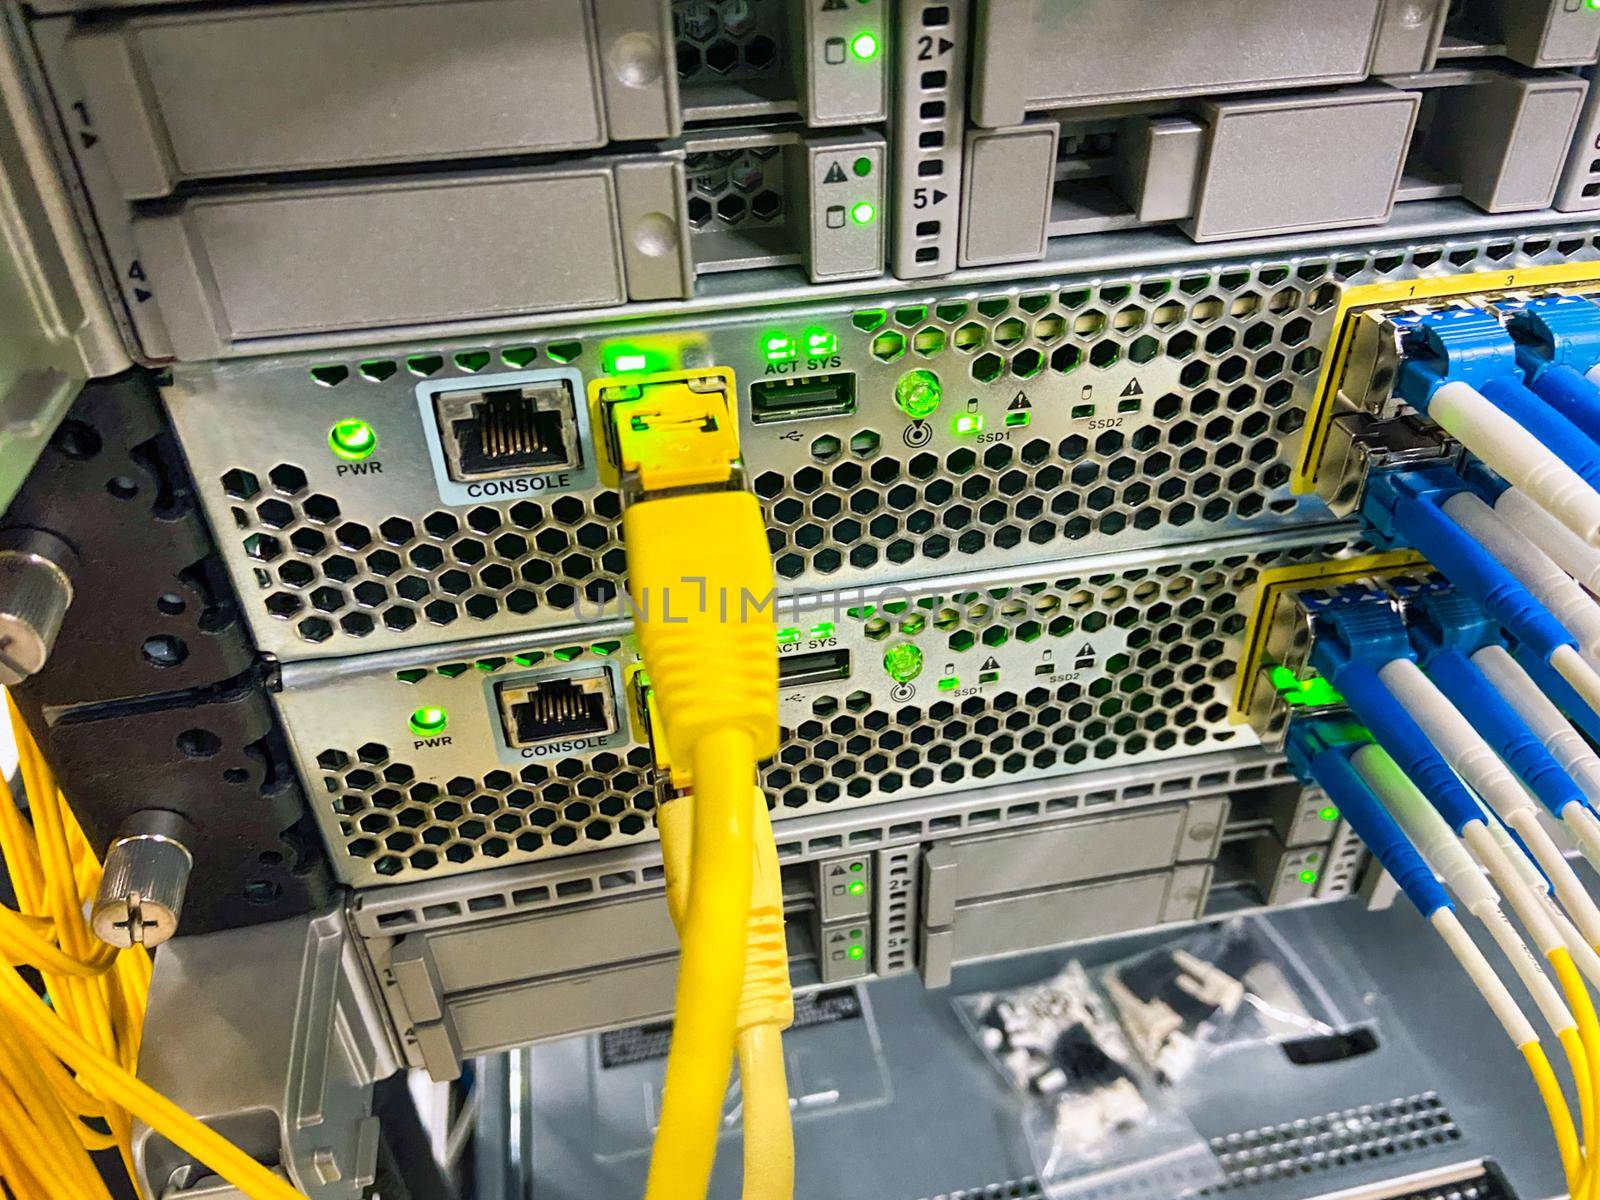 Network equipment with green lights working in a data center by Imagenet